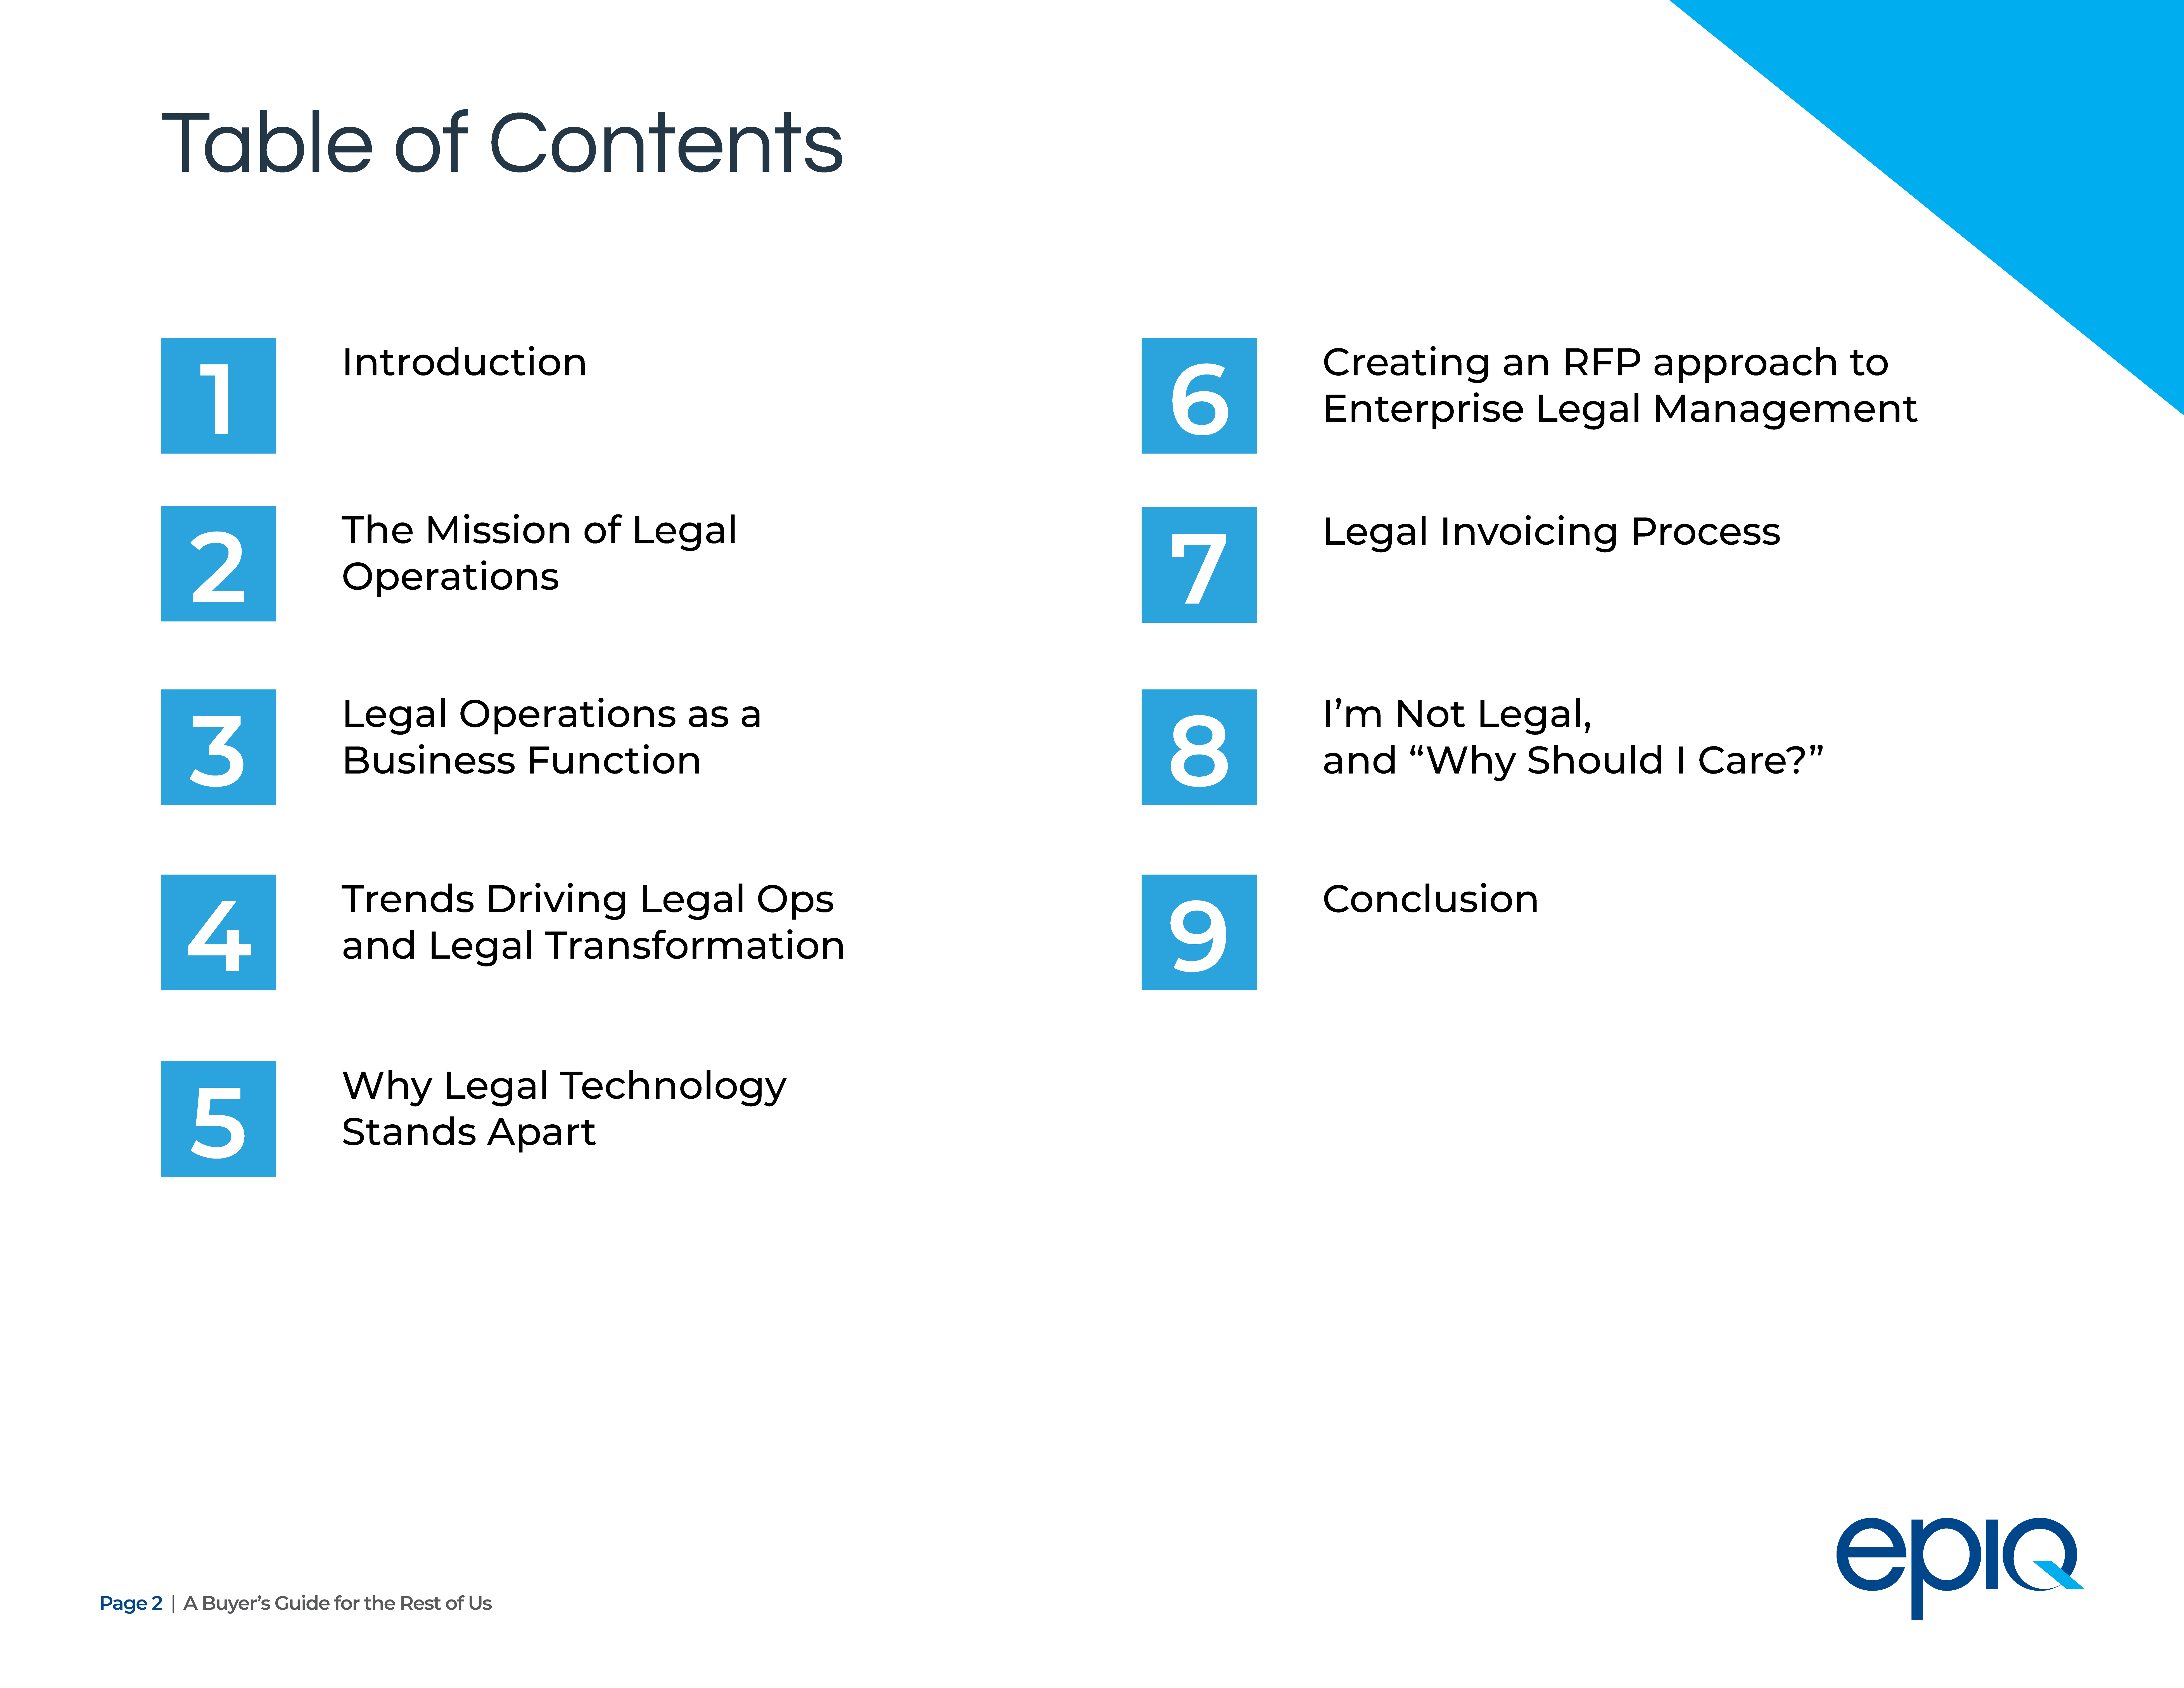 Epiq_Legal Business Advisory Legal Buyers Guide-e-book_table of contents